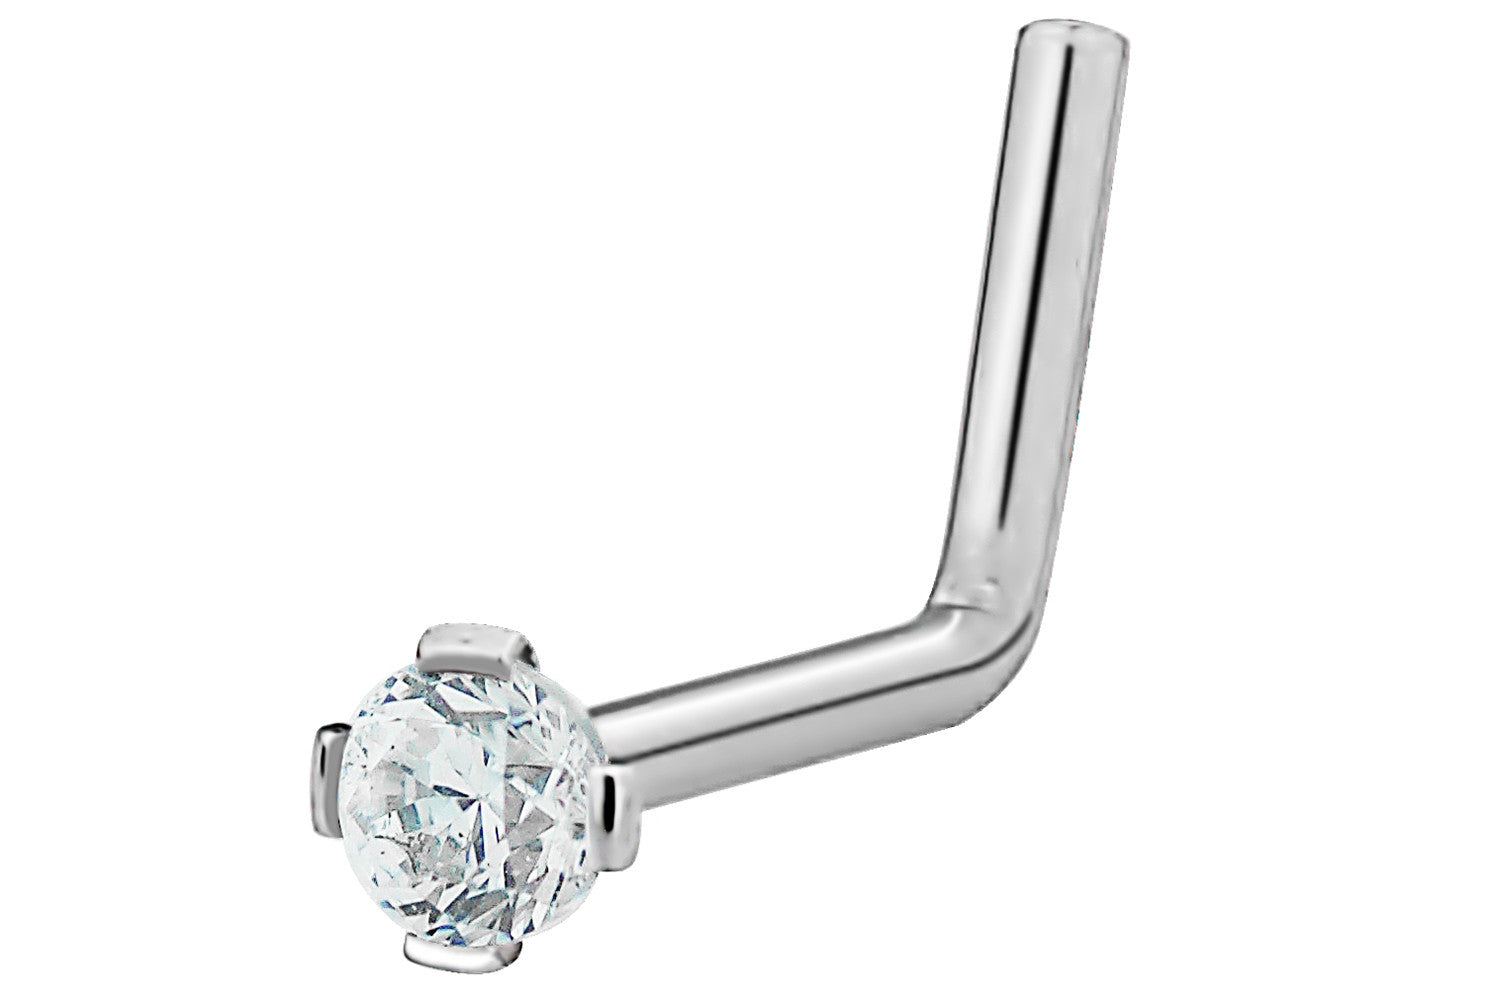 This L-shaped nose stud is made entirely with 316L Surgical Steel (including the prongs). This nose jewelry features a 2 mm Cubic Zirconia round crystal and is hypoallergenic and nickel free.